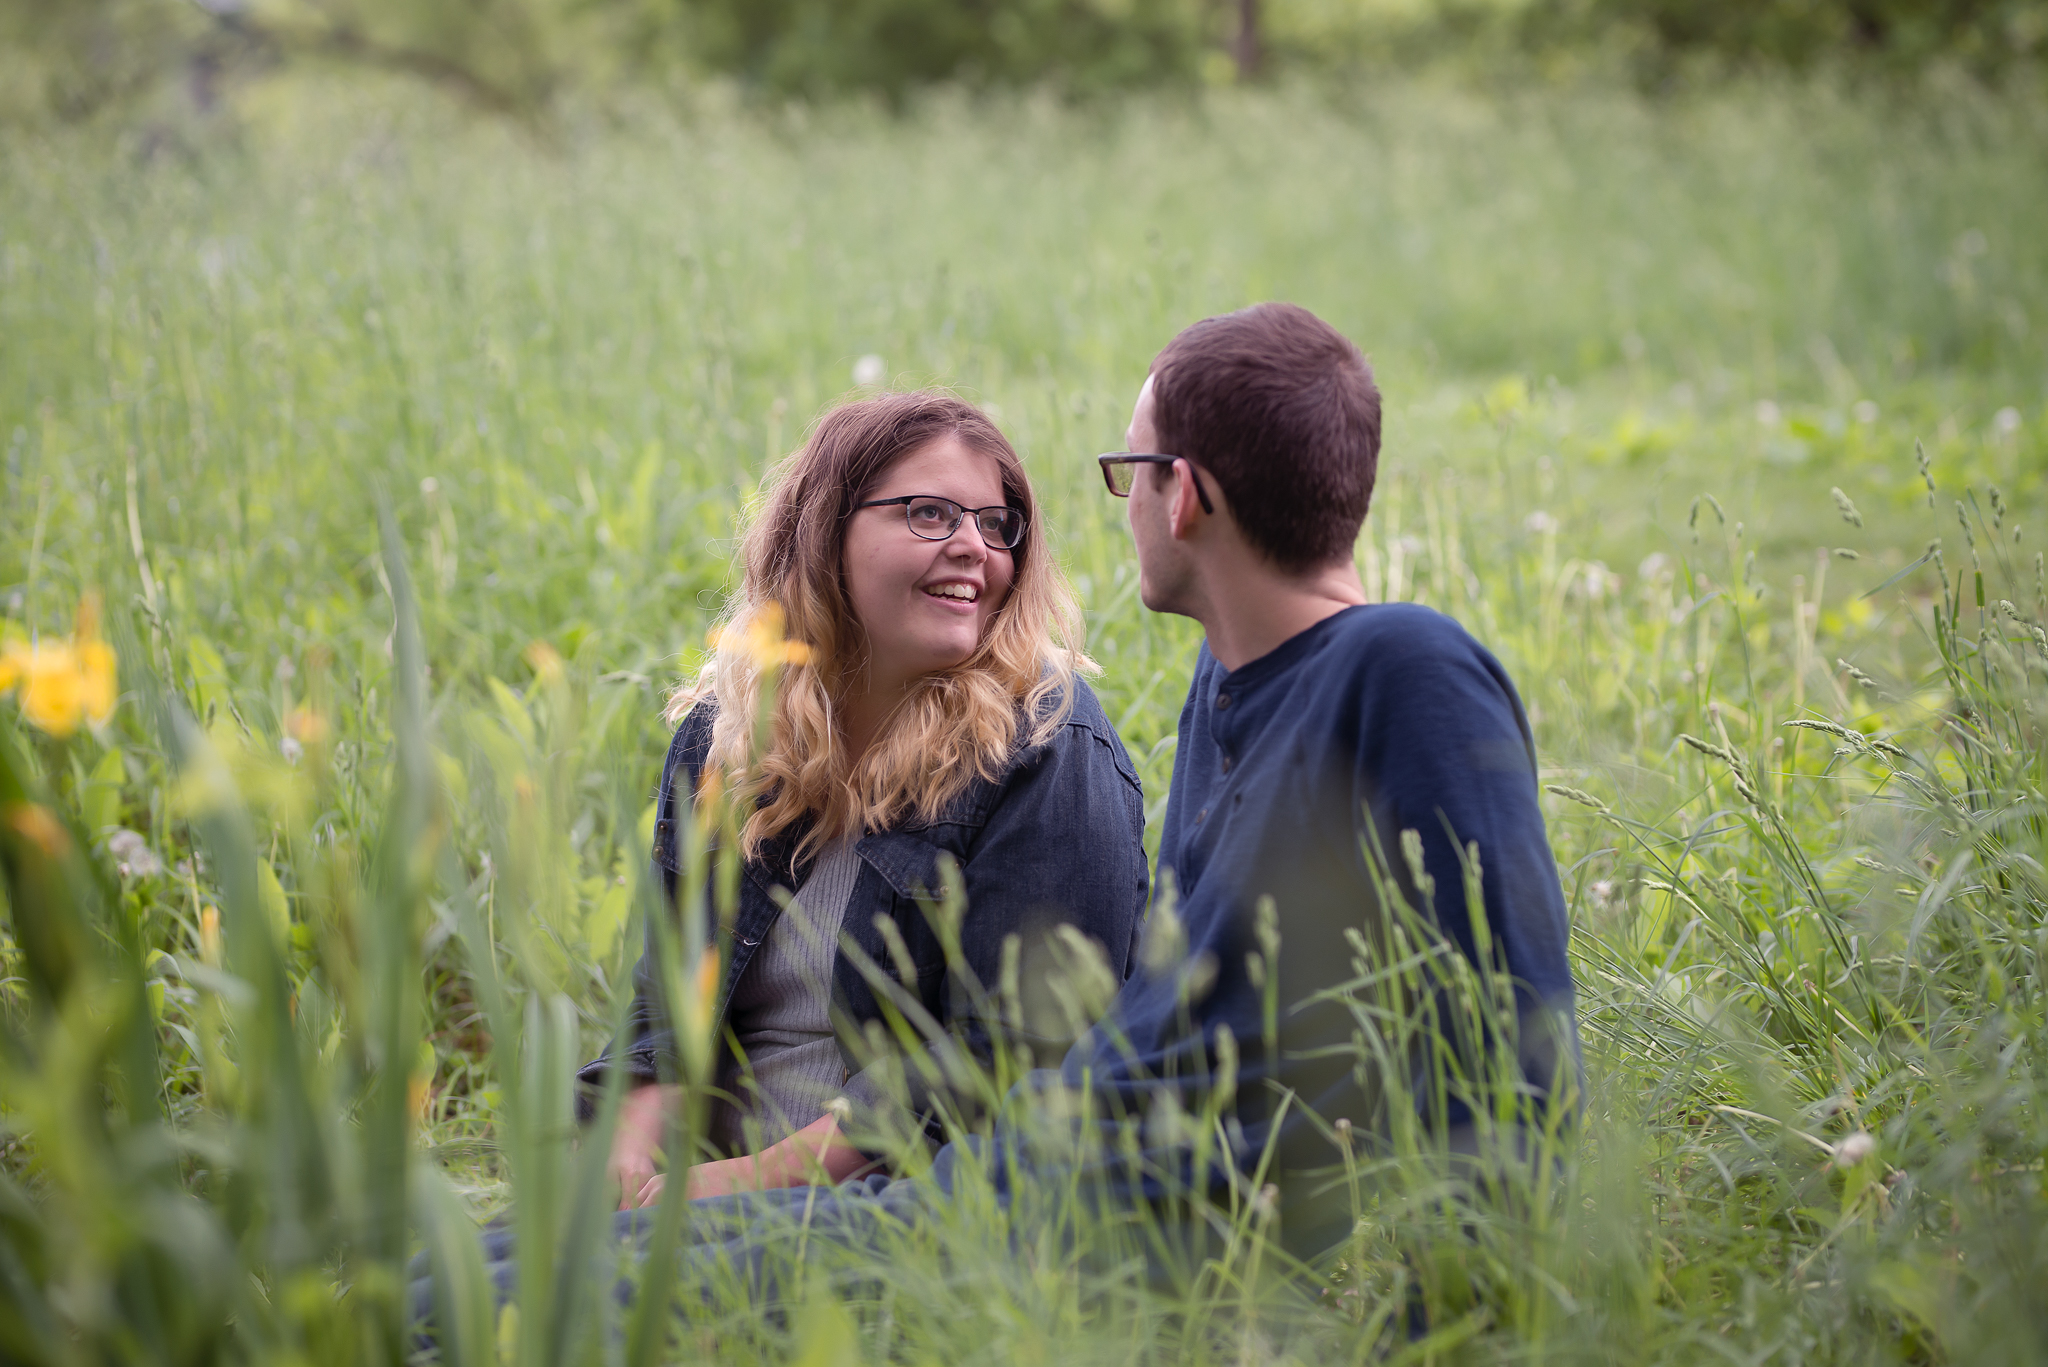 Couples343NaomiLuciennePhotography062018-Edit.jpg